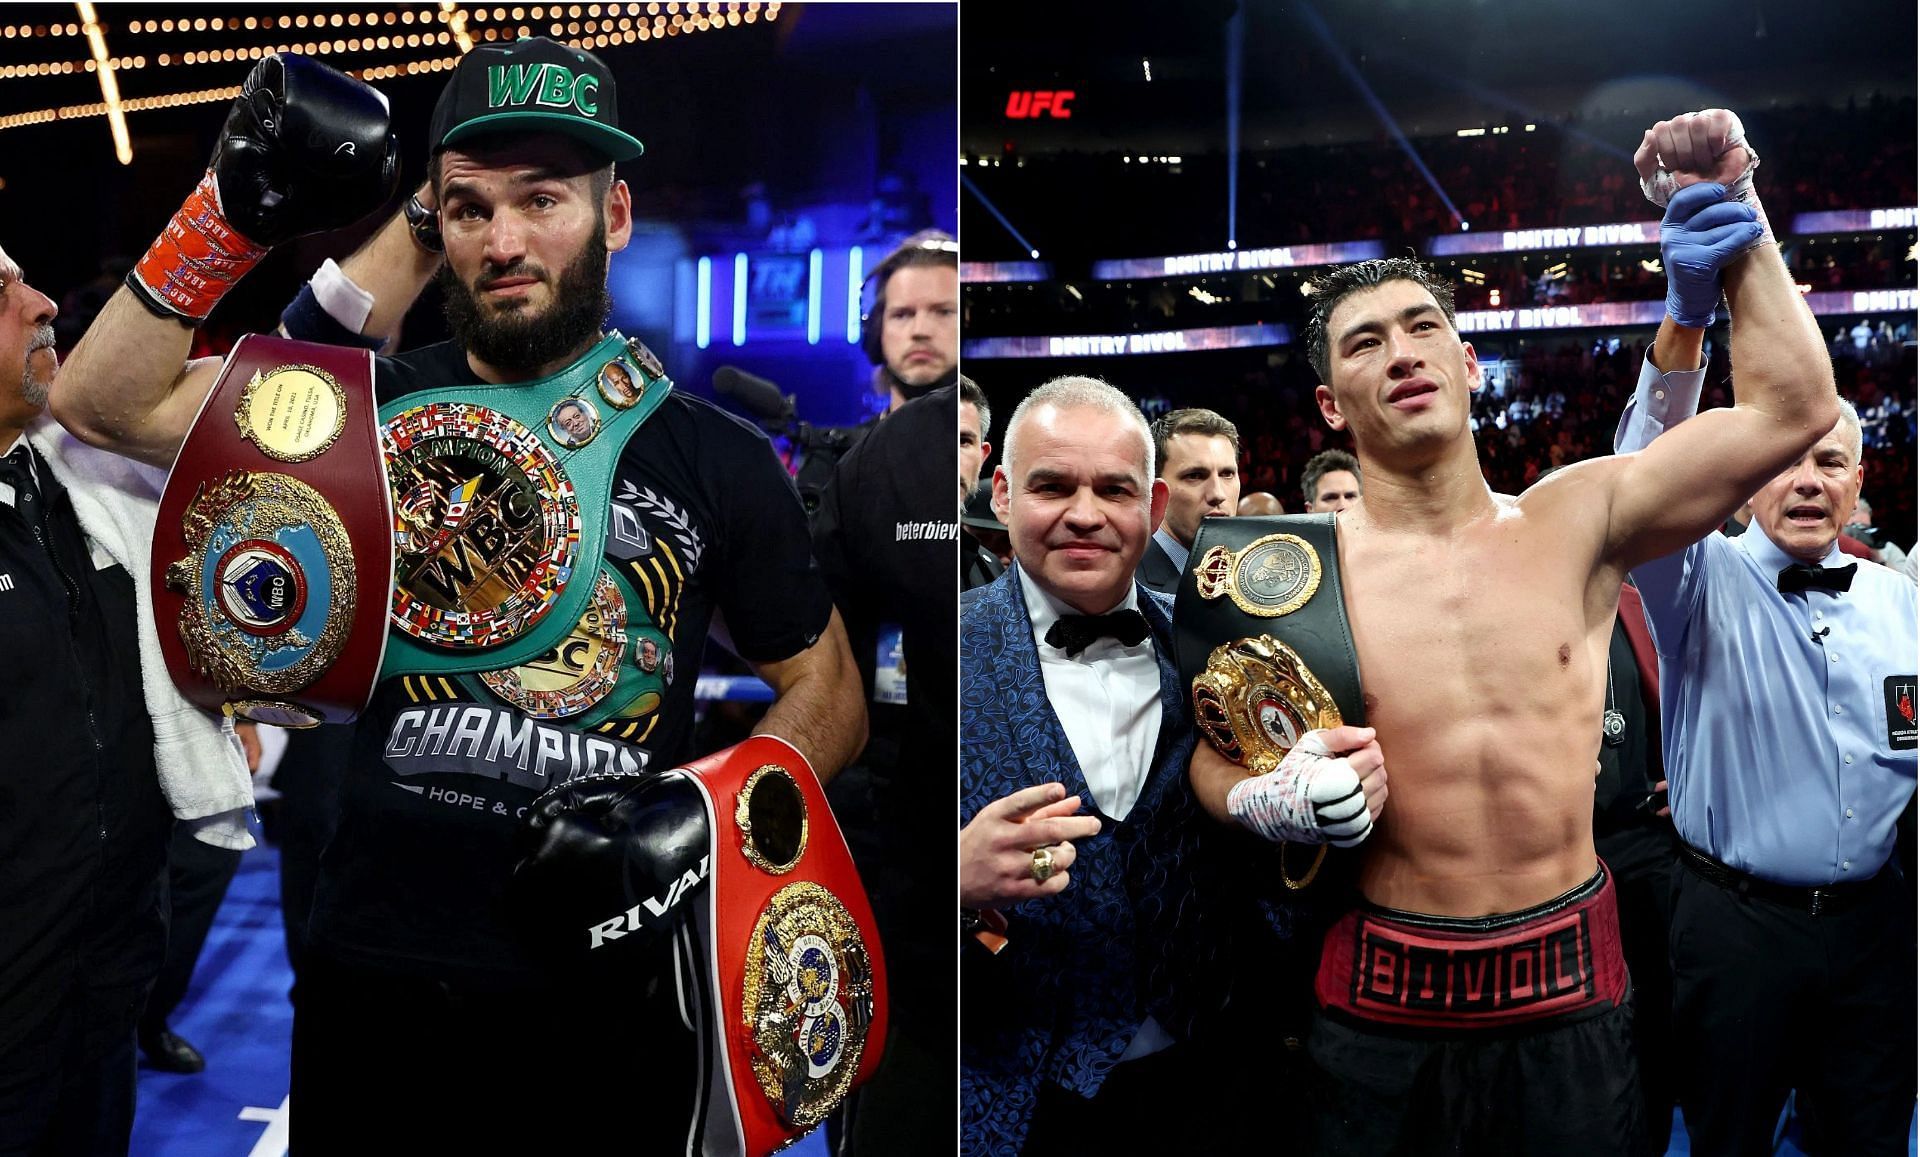 Artur Beterbiev (L) has his eyes set on an undisputed title fight with Dmitry Bivol (R).